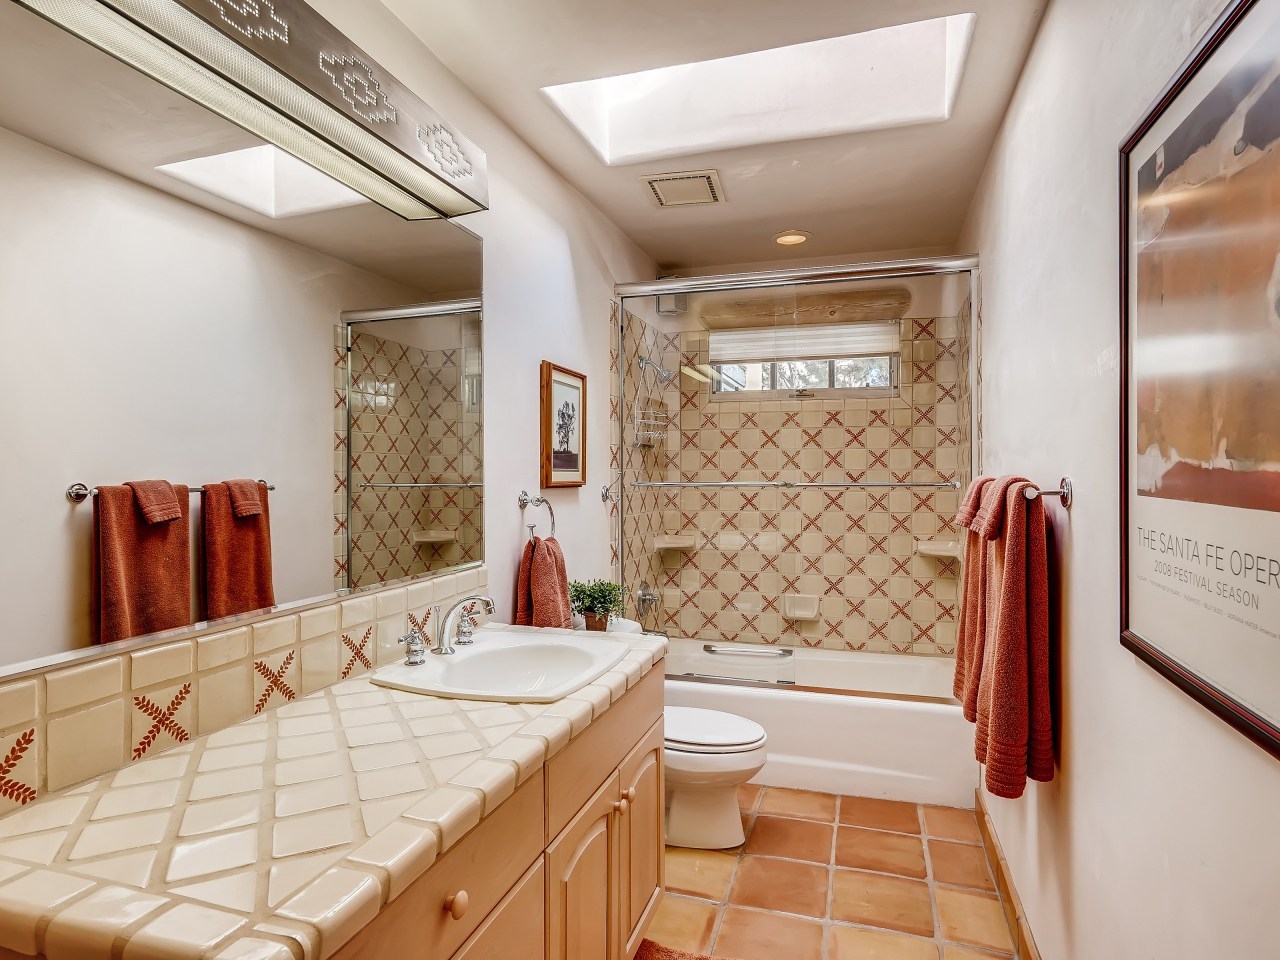 3101 Old Pecos Trail #612, Santa Fe, New Mexico 87505, 3 Bedrooms Bedrooms, ,4 BathroomsBathrooms,Residential,For Sale,3101 Old Pecos Trail #612,202100622